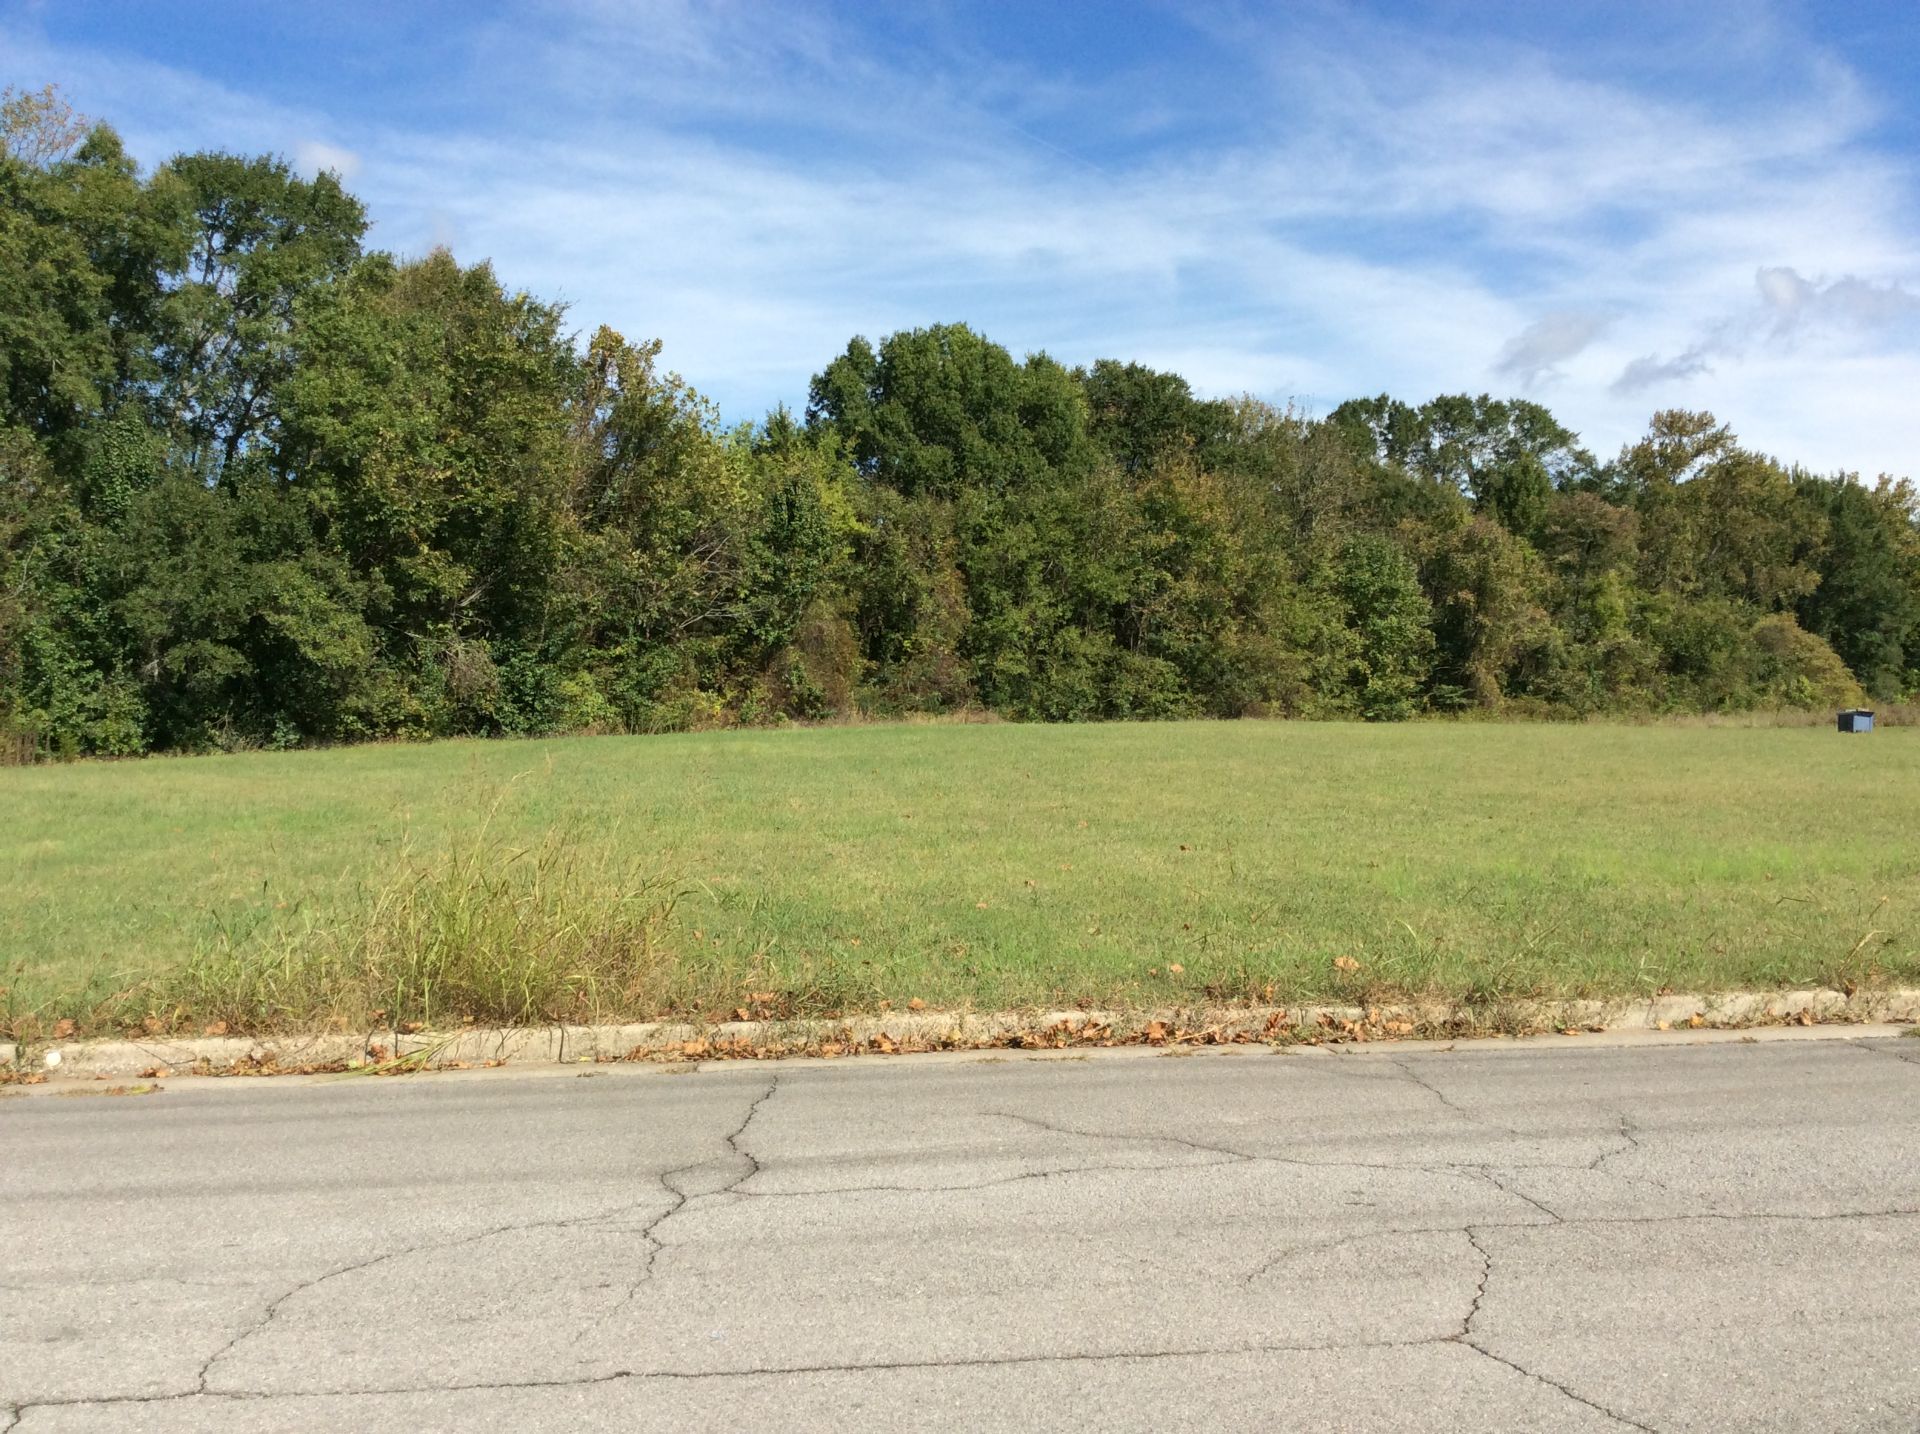 6 Acres± Commerical Lot - Hemingway Drive Decatur, Alabama.  The property is currently zoned R-6. - Image 3 of 7